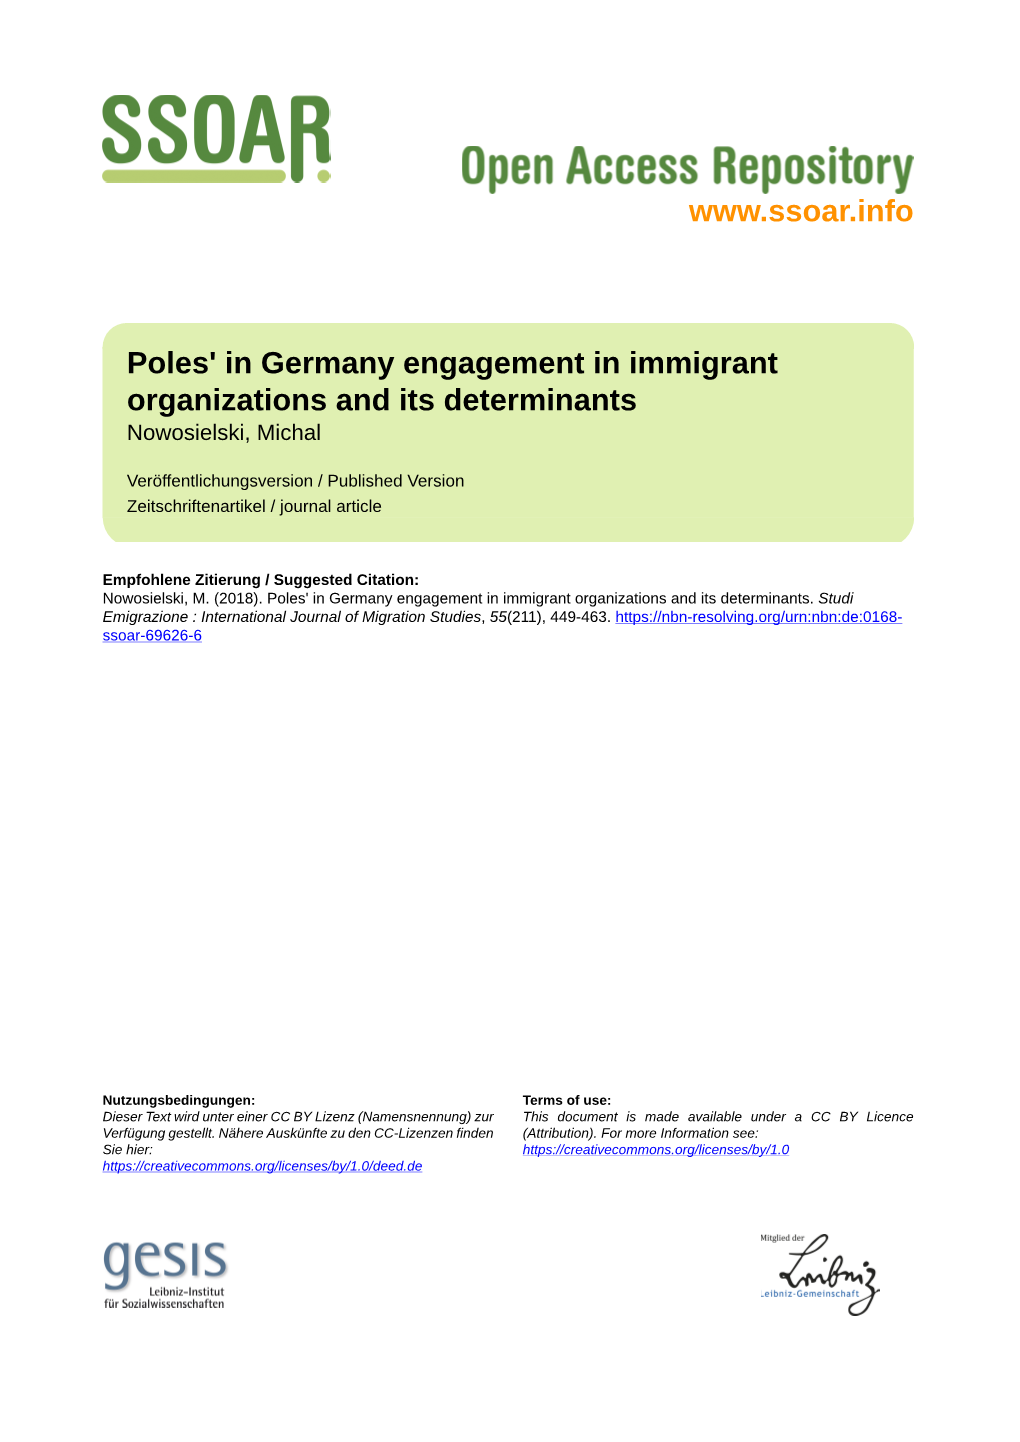 Poles' in Germany Engagement in Immigrant Organizations and Its Determinants Nowosielski, Michal